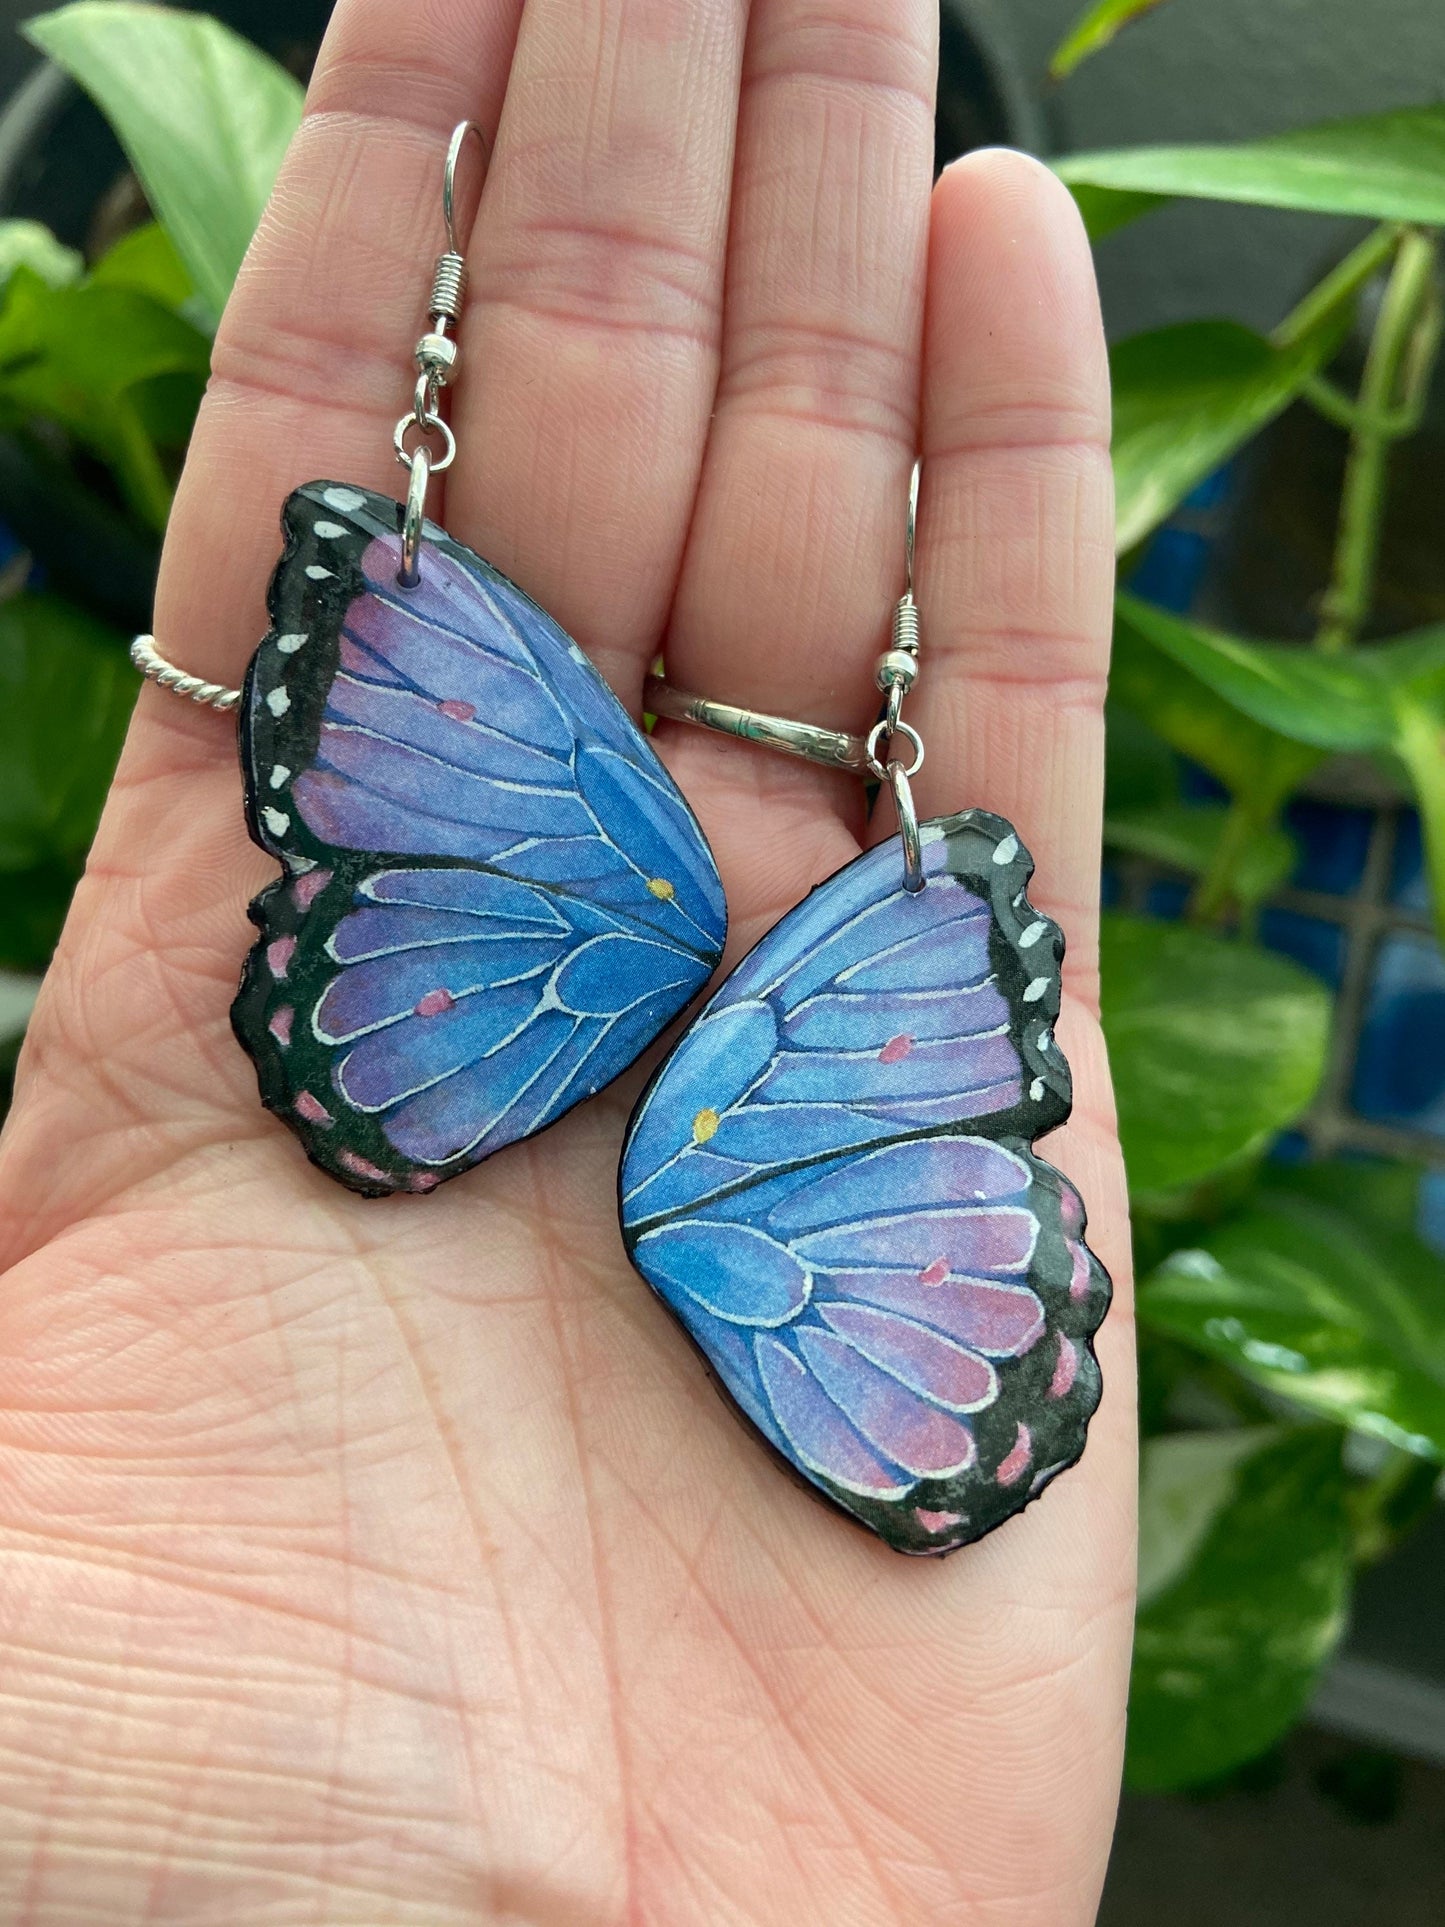 Butterfly Wings- Purple & blue morpho upcycled paper earrings, fairy cottage core jewelry